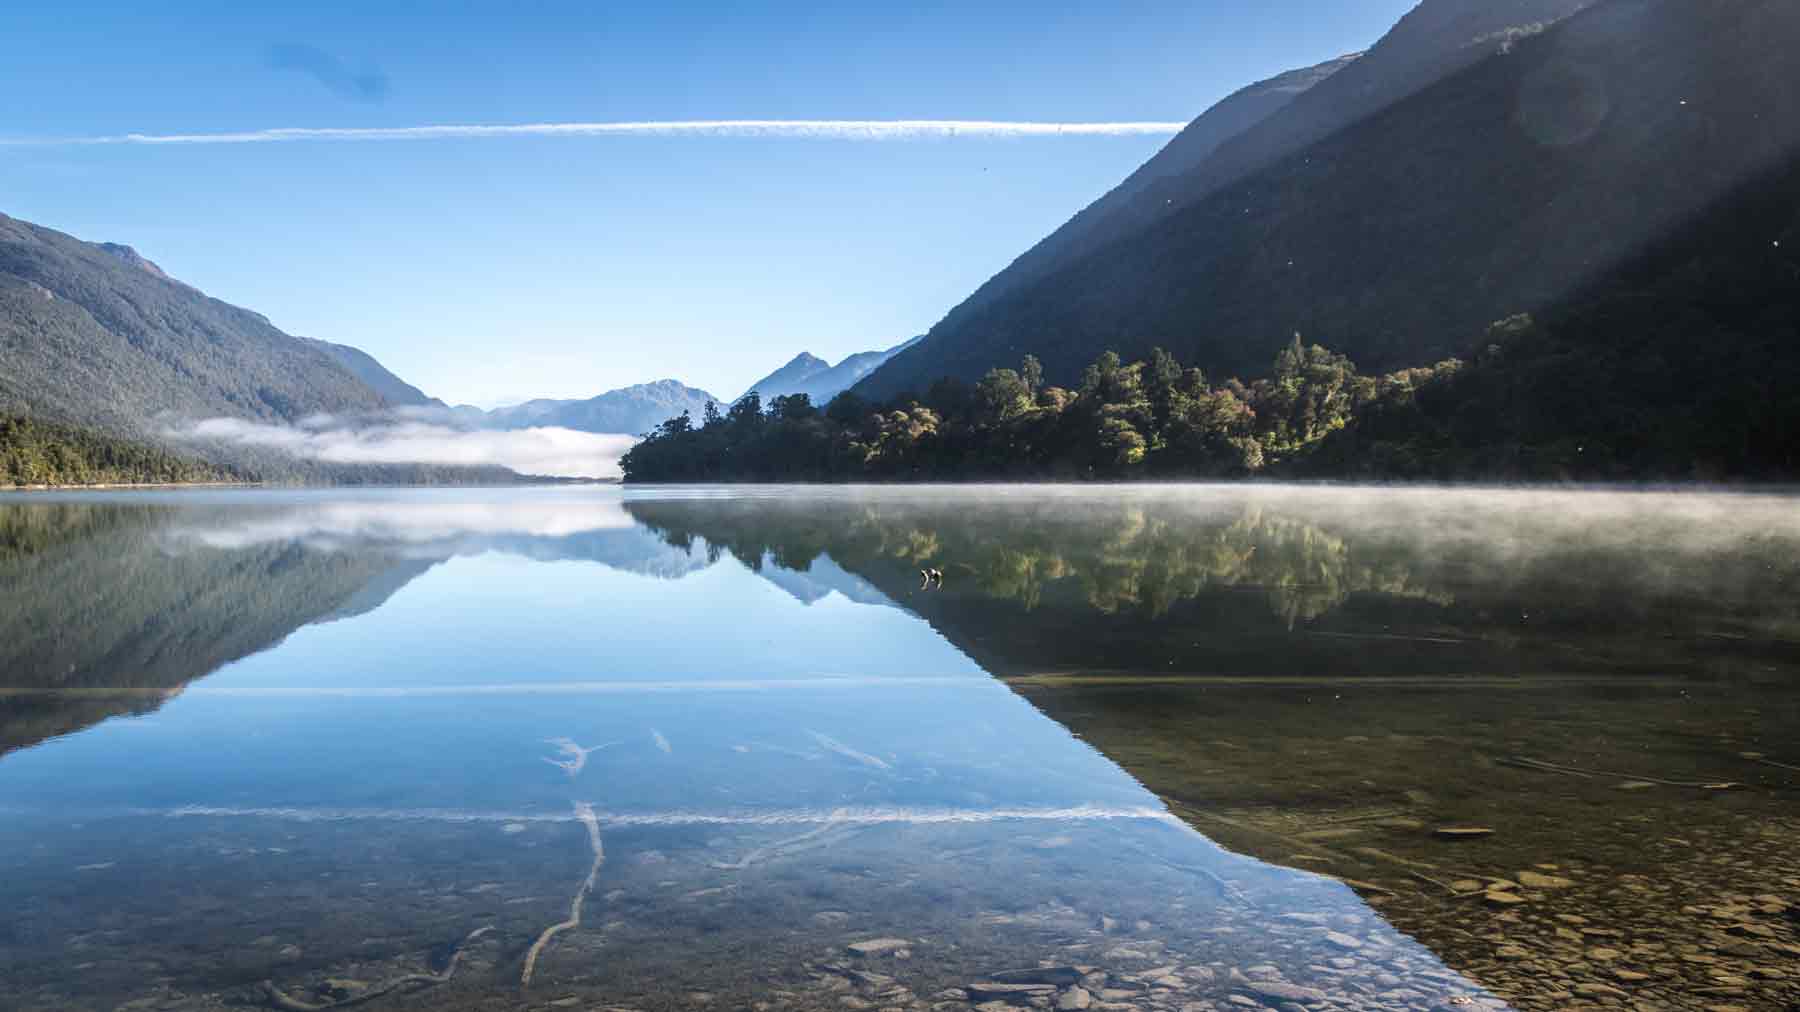 The hills and sky reflected on the glasslike surface of Lake Alabaster, Fiordland, New Zealand. Taken by Asmuss founder Fiona